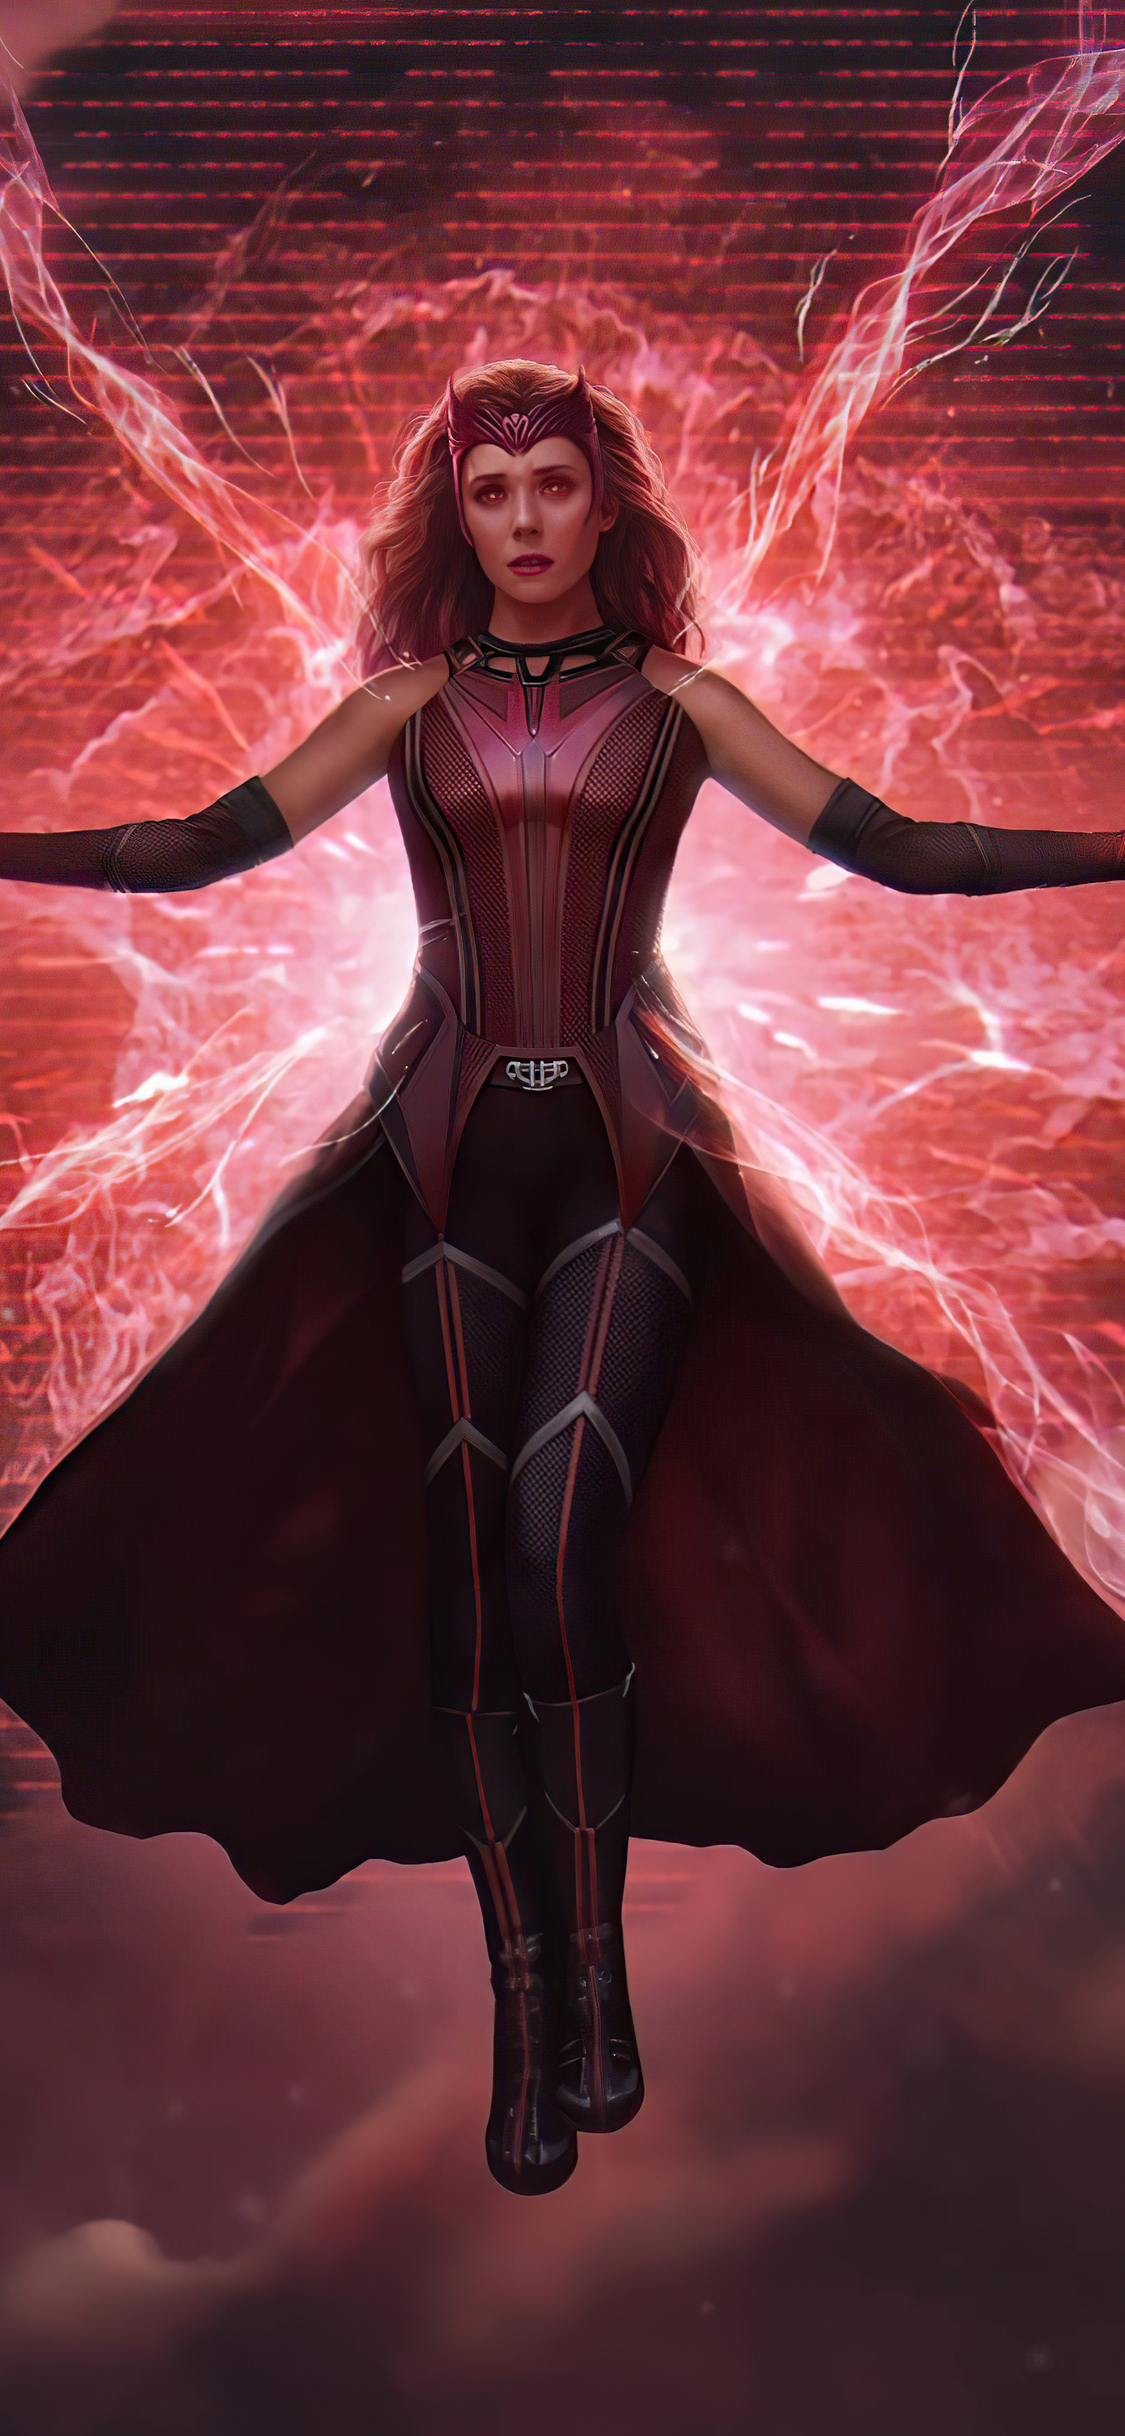 Scarlet Witch Best Moments in the MCU So Far Ranked